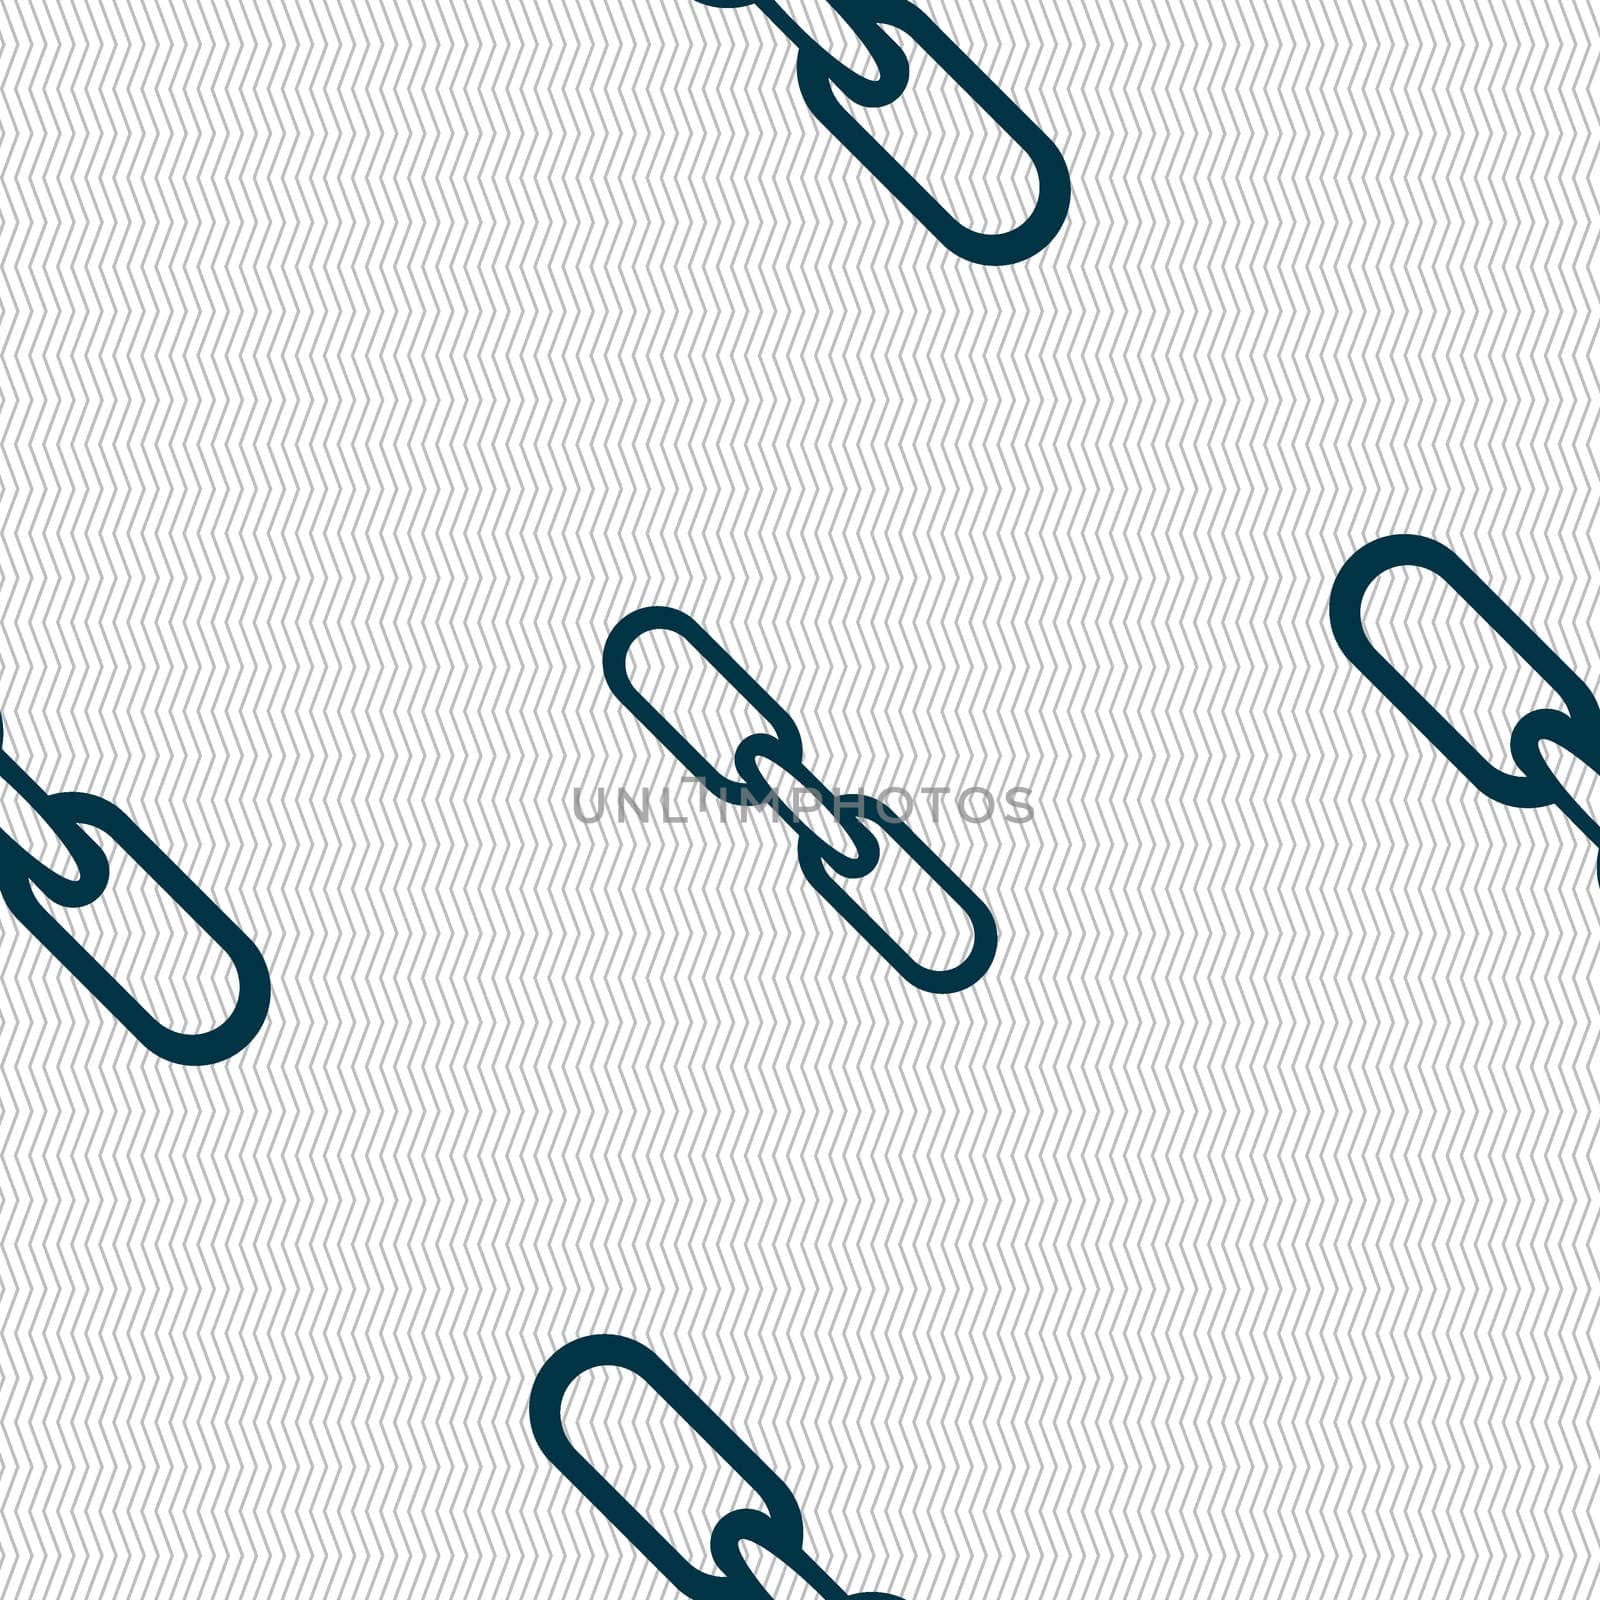 Link sign icon. Hyperlink chain symbol. Seamless abstract background with geometric shapes. illustration